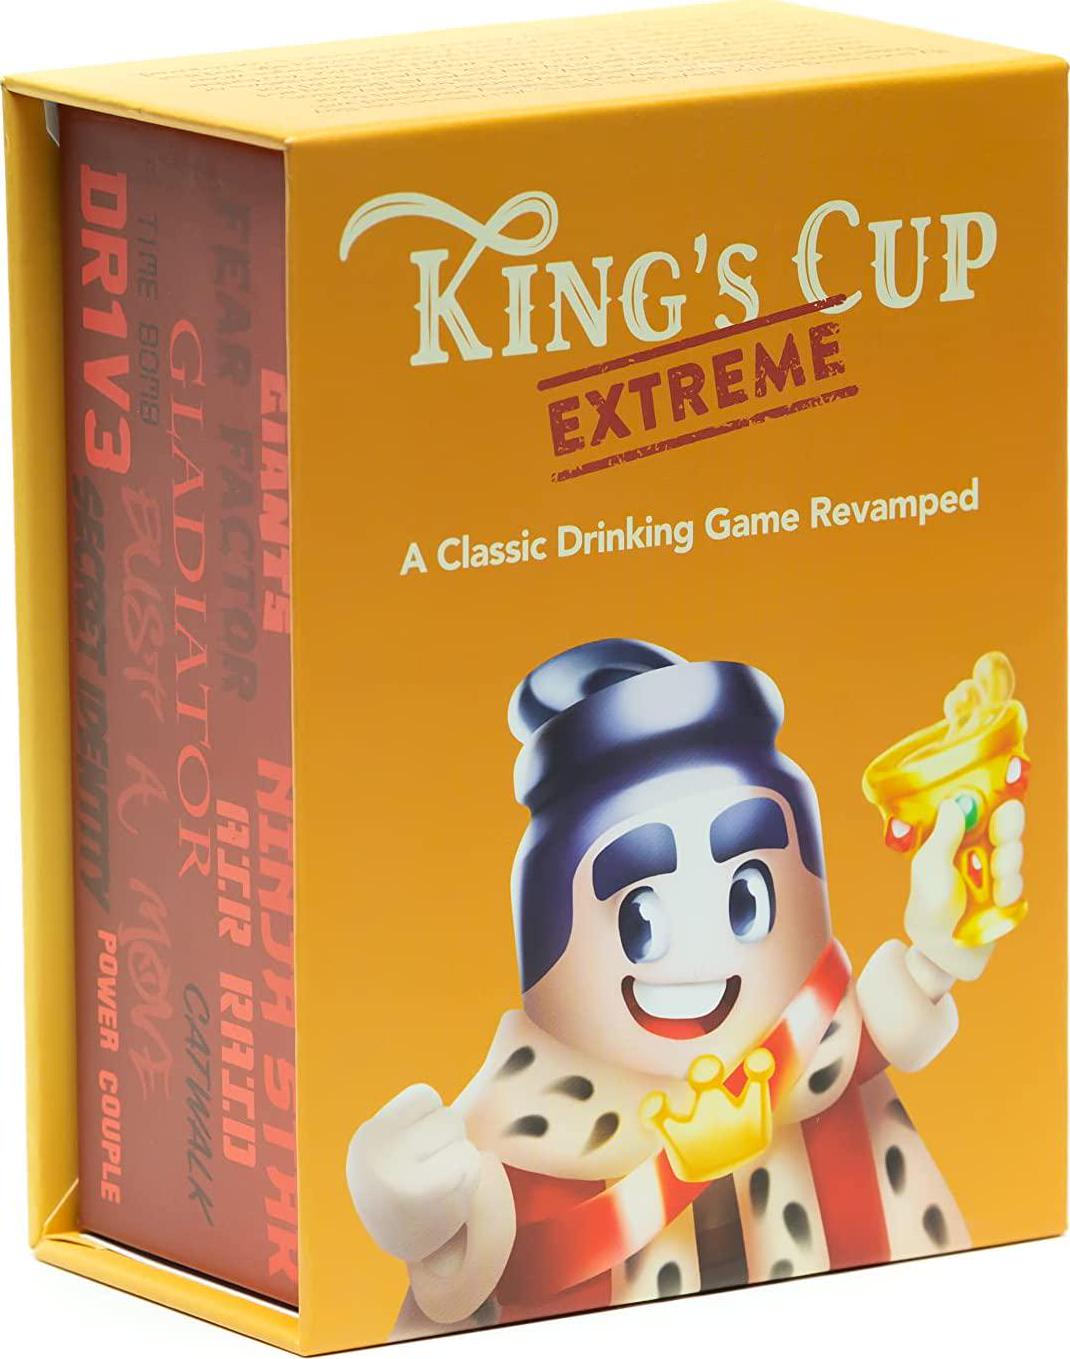 Lost Boy Entertainment, King s Cup Extreme - Drinking Games - Card Games for Adults, Couples, Bachelorettes - Party Games - Game Night - Date Night - Laugh and Drink - Get Buzzed Have Fun